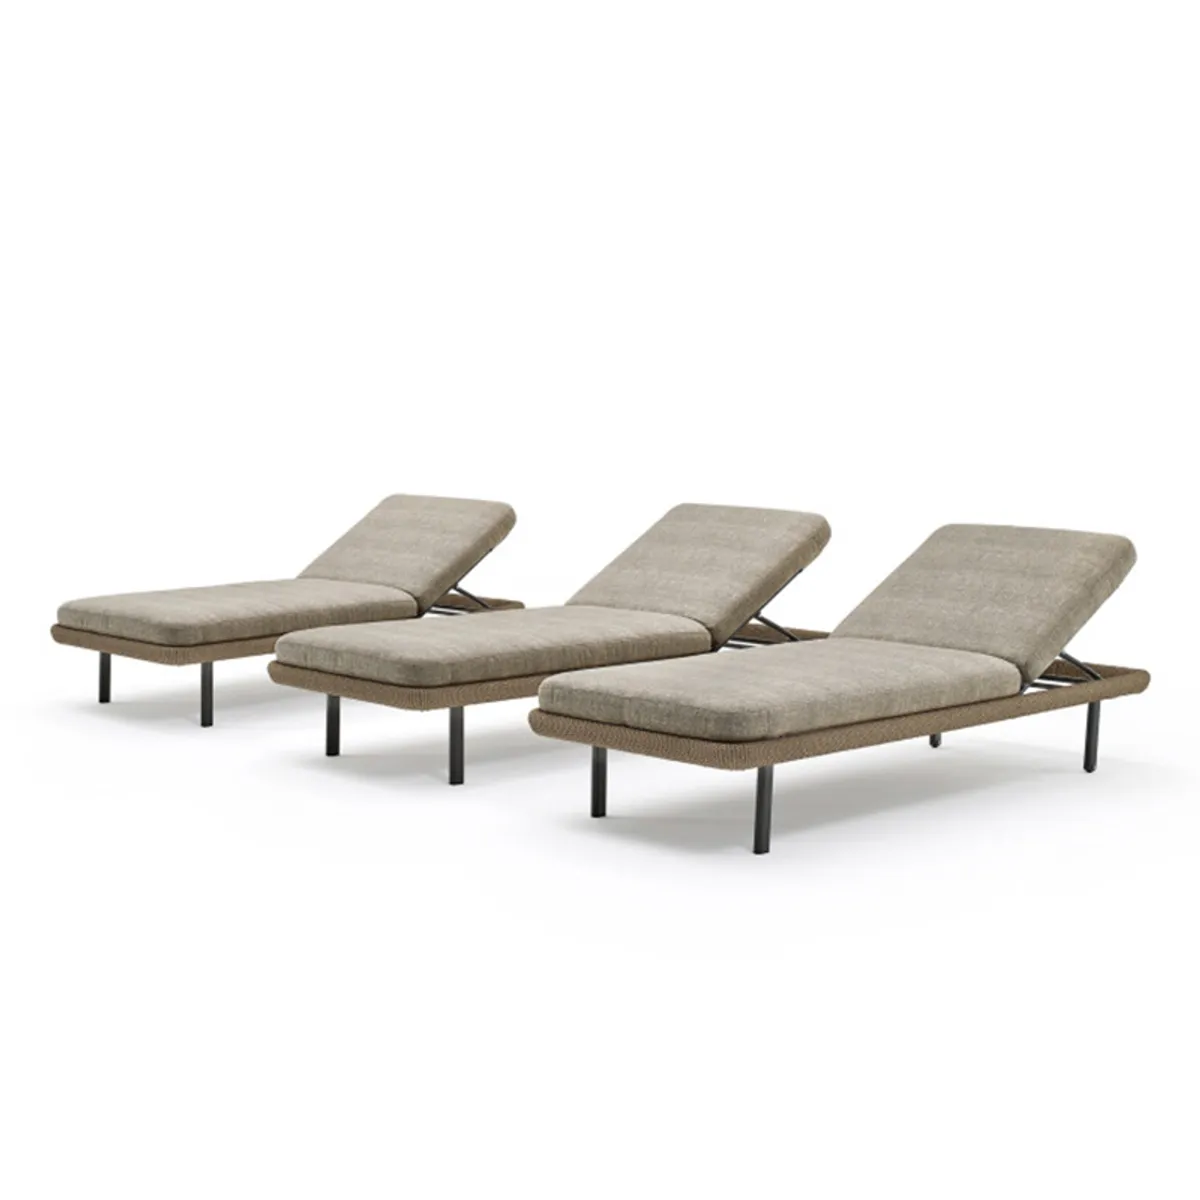 Babylon Daybed Outdoor Lounge Furniture For Poolside Cafes And Hotel Terraaces Insideoutcontracts 031